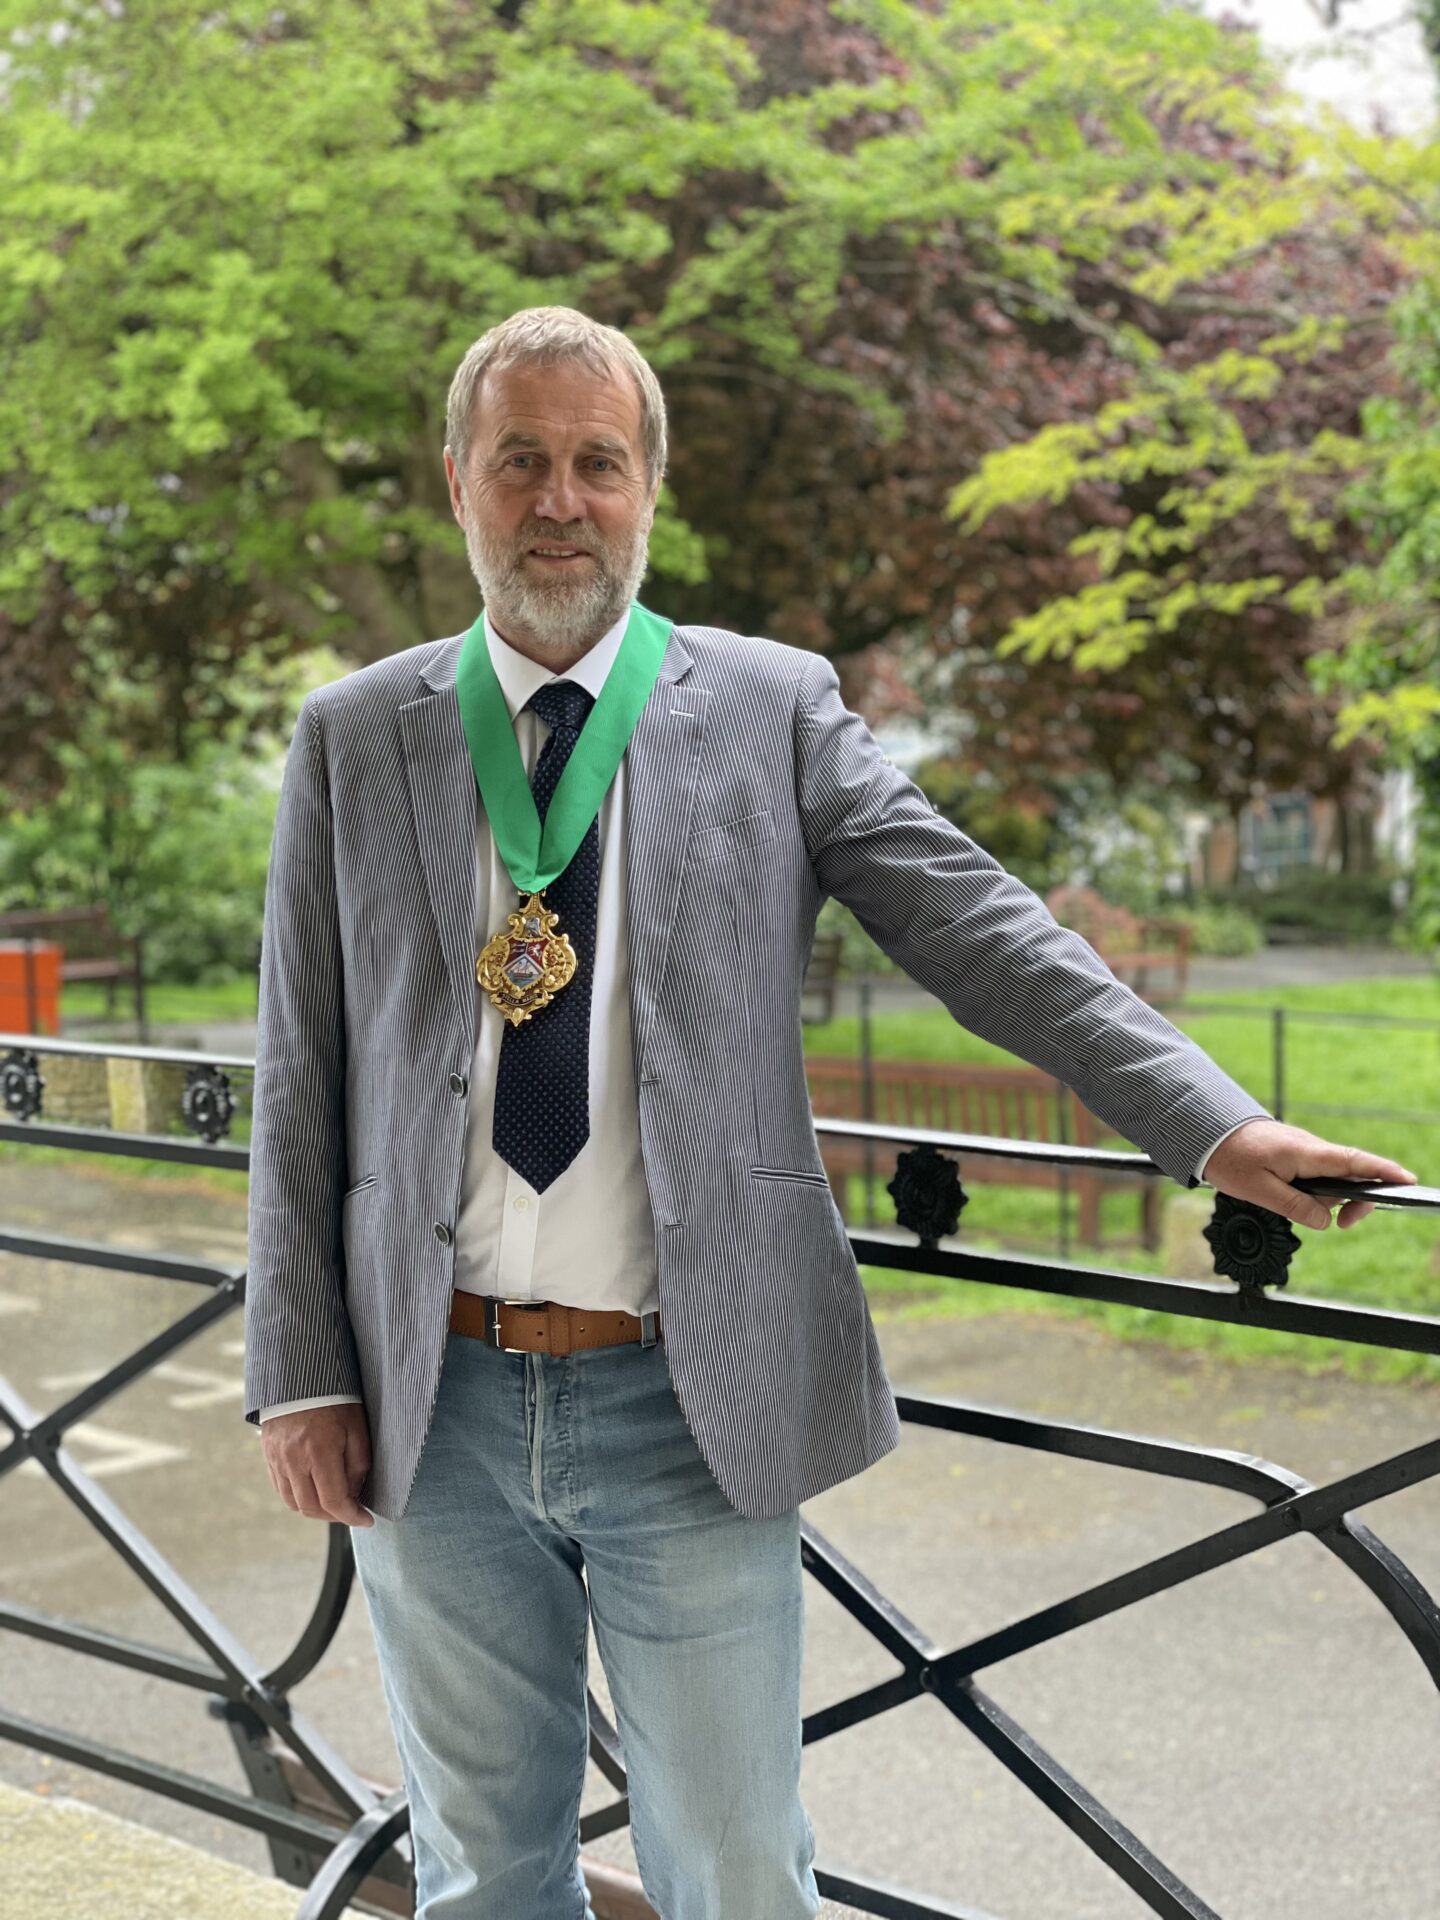 The Mayor of Broadstairs & St. Peter's Cllr Mike Garner, wearing his badge of office.
Picture taken in Pierremont Park, Broadstairs.